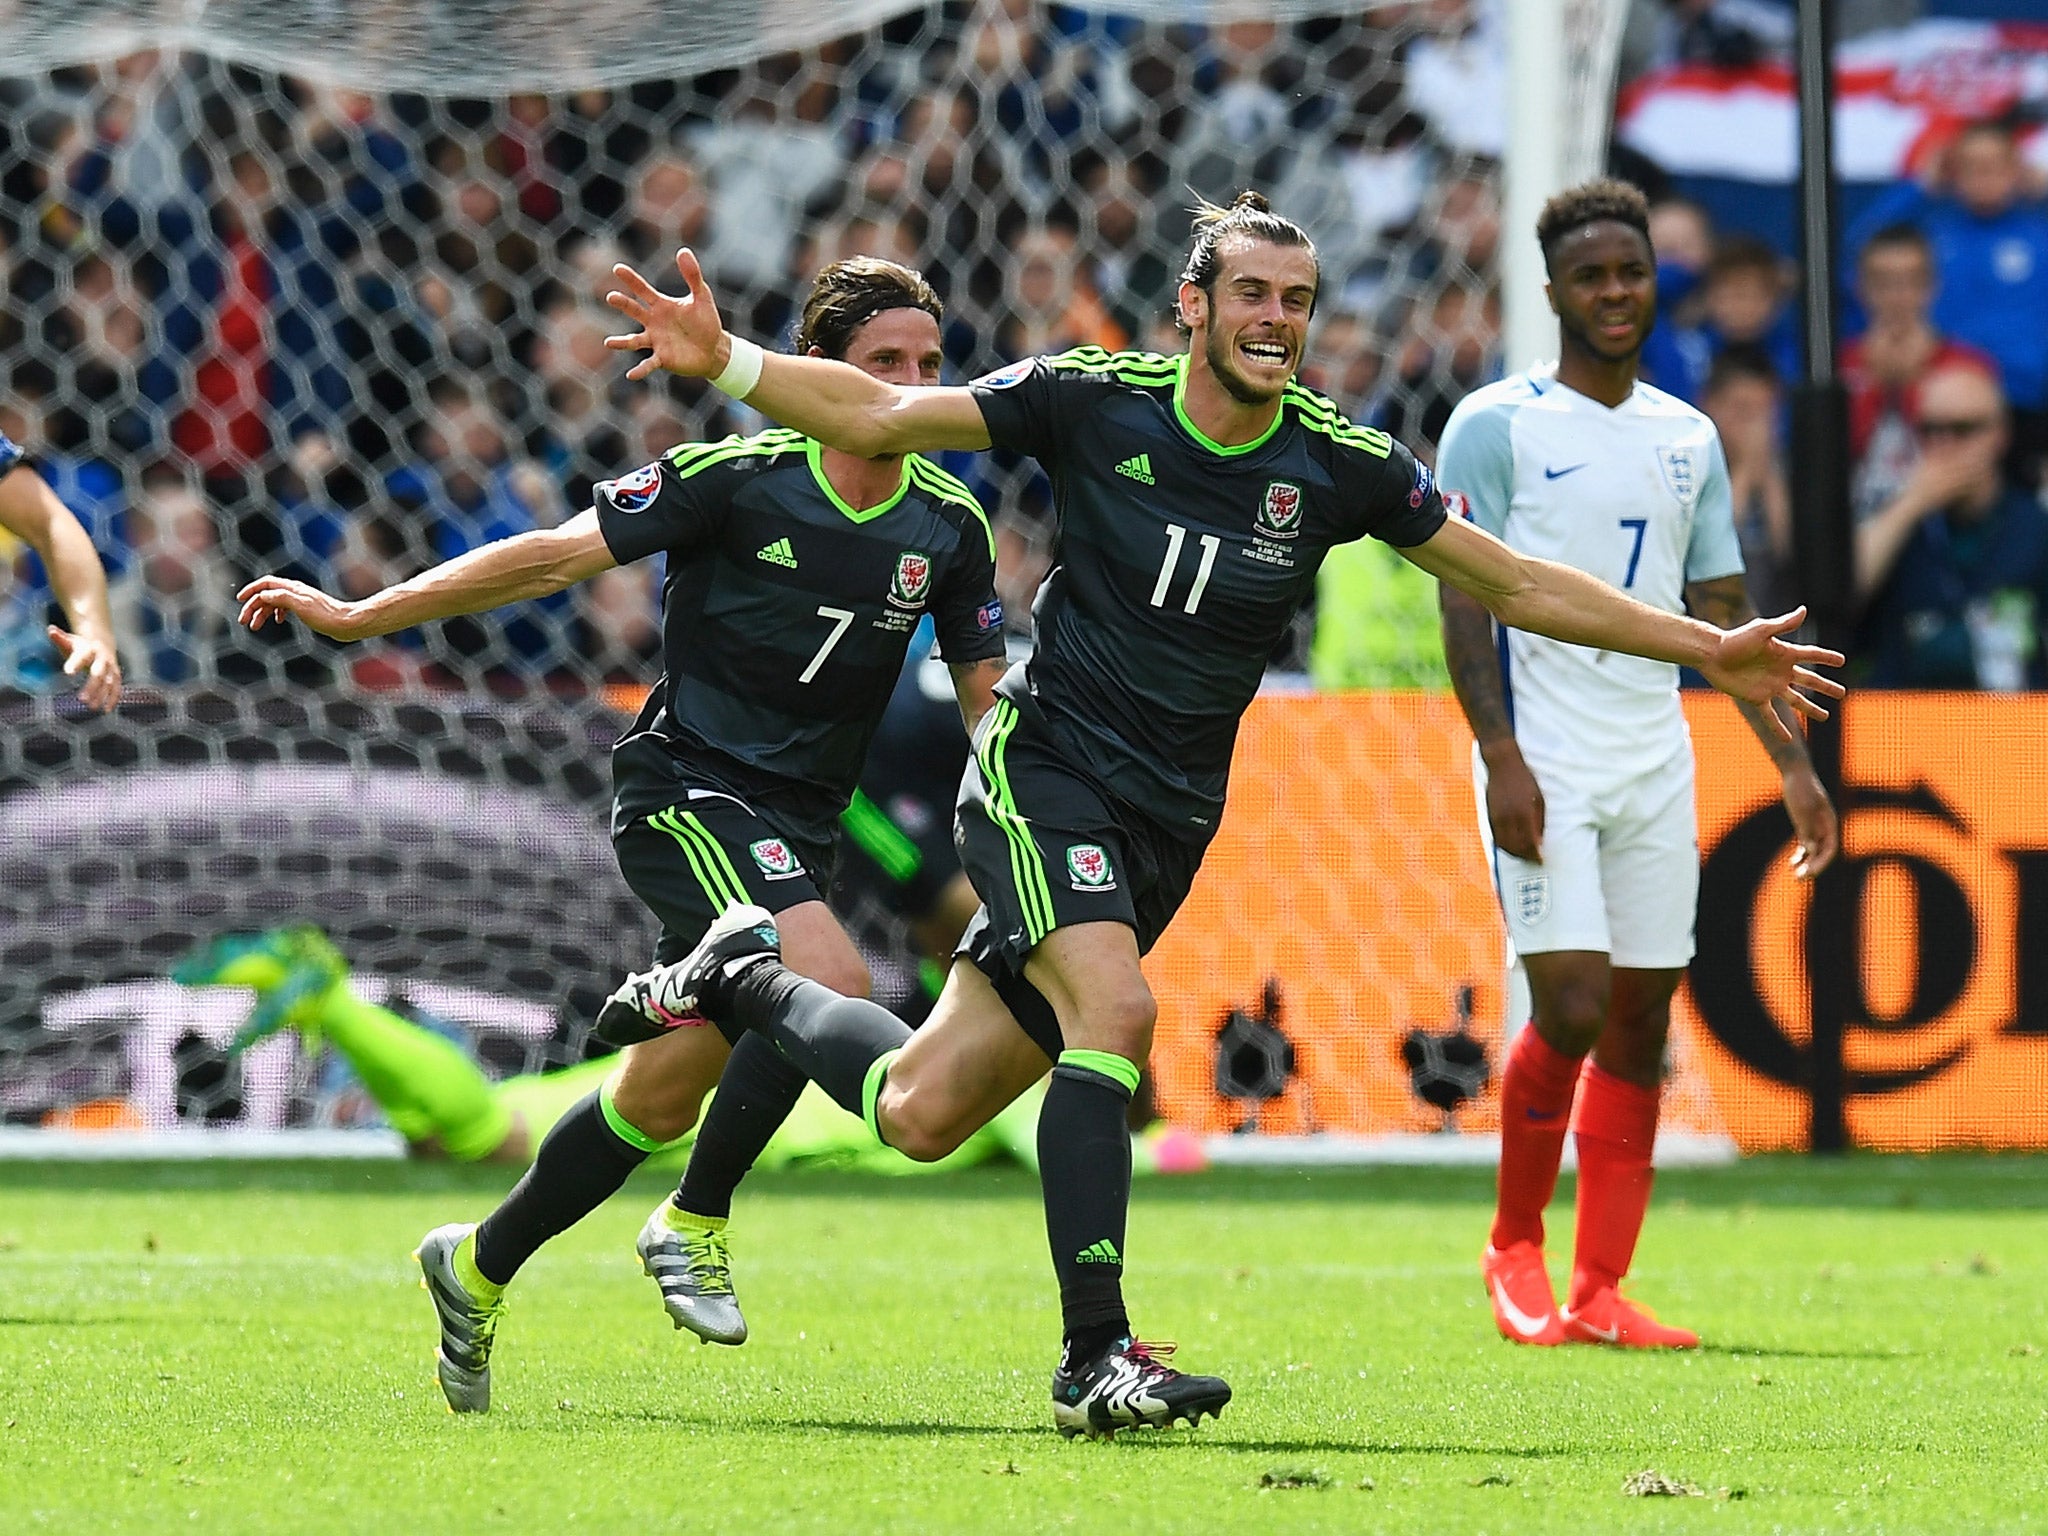 There is plenty for England to learn from Wales's success at Euro 2016